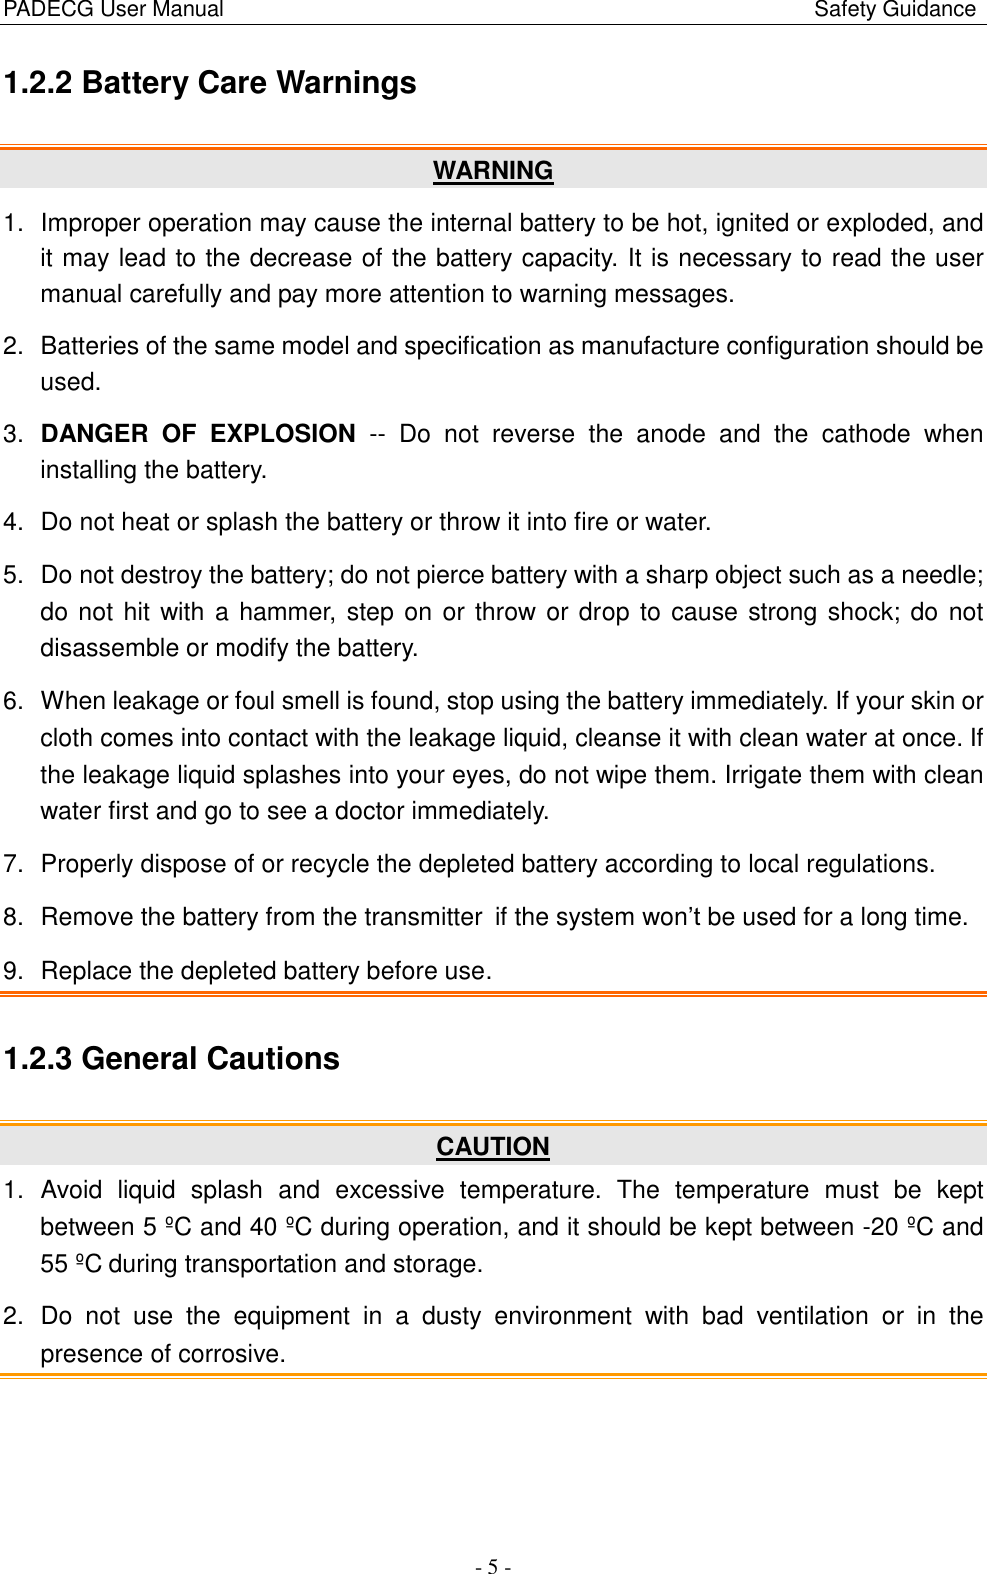 PADECG User Manual                                                                                                            Safety Guidance - 5 - 1.2.2 Battery Care Warnings   WARNING 1.  Improper operation may cause the internal battery to be hot, ignited or exploded, and it may lead to the decrease of the battery capacity. It is necessary to read the user manual carefully and pay more attention to warning messages. 2.  Batteries of the same model and specification as manufacture configuration should be used. 3. DANGER  OF  EXPLOSION -- Do not  reverse  the  anode  and  the  cathode  when installing the battery. 4. Do not heat or splash the battery or throw it into fire or water. 5.  Do not destroy the battery; do not pierce battery with a sharp object such as a needle; do not hit with a hammer, step on or throw or drop to cause strong shock; do not disassemble or modify the battery. 6.  When leakage or foul smell is found, stop using the battery immediately. If your skin or cloth comes into contact with the leakage liquid, cleanse it with clean water at once. If the leakage liquid splashes into your eyes, do not wipe them. Irrigate them with clean water first and go to see a doctor immediately. 7.  Properly dispose of or recycle the depleted battery according to local regulations. 8.  Remove the battery from the transmitter if the system won’t be used for a long time. 9.  Replace the depleted battery before use. 1.2.3 General Cautions CAUTION 1.  Avoid  liquid  splash  and  excessive  temperature.  The  temperature  must  be  kept between 5 ºC  and 40 ºC  during operation, and it should be kept between -20 ºC  and 55 ºC  during transportation and storage. 2. Do not  use  the  equipment  in  a  dusty  environment  with  bad  ventilation  or in  the presence of corrosive. 